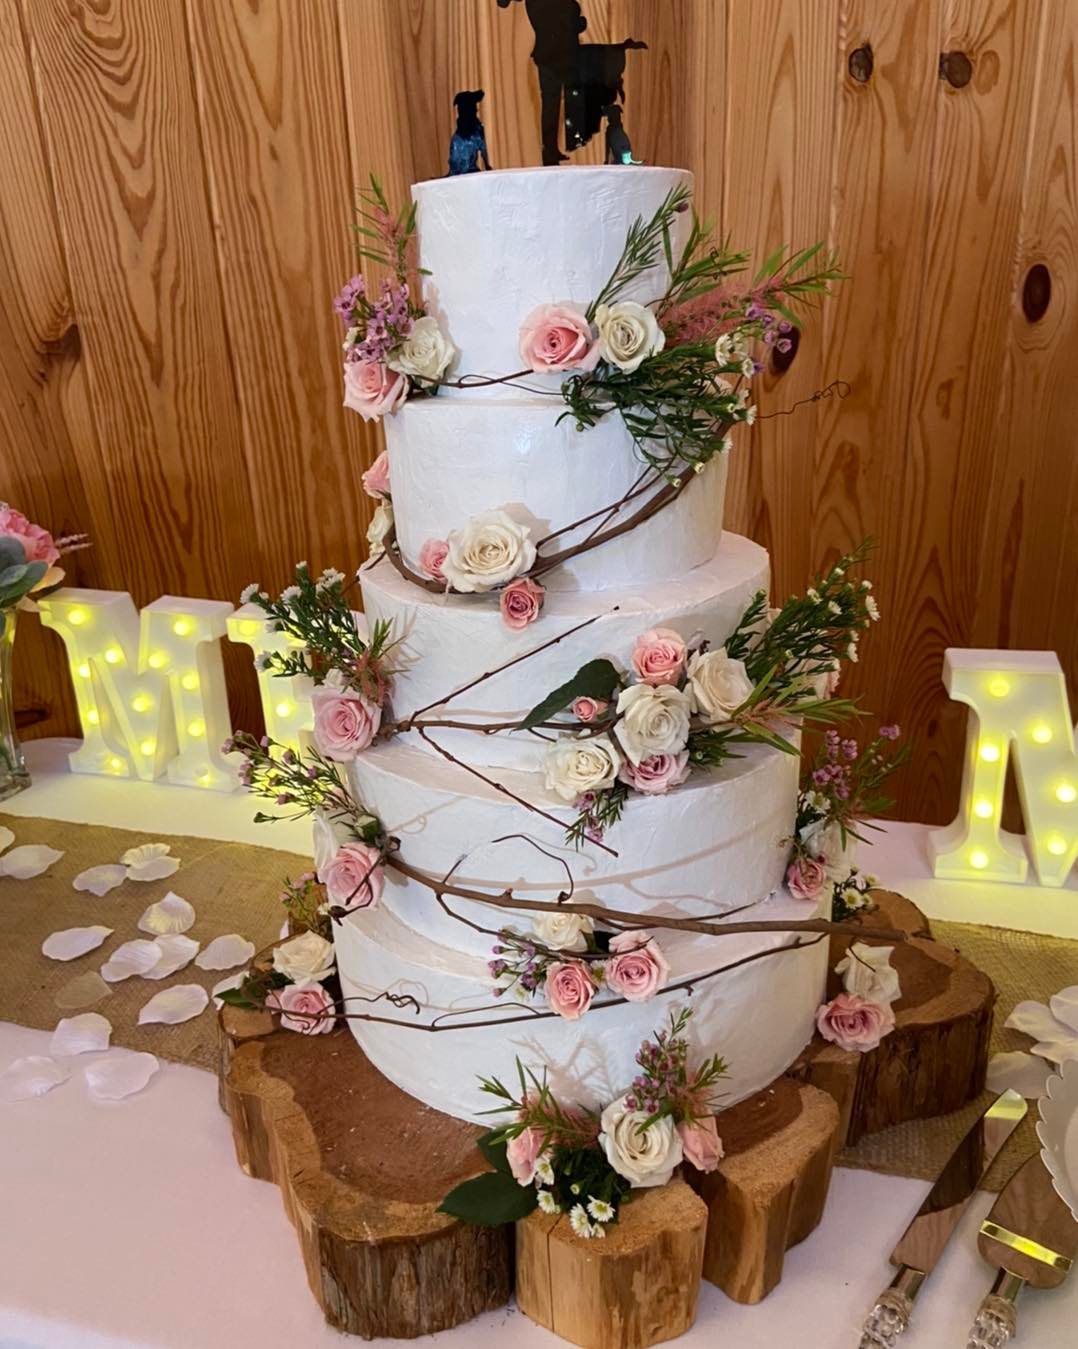 A five-tier wedding cake decorated with flowers